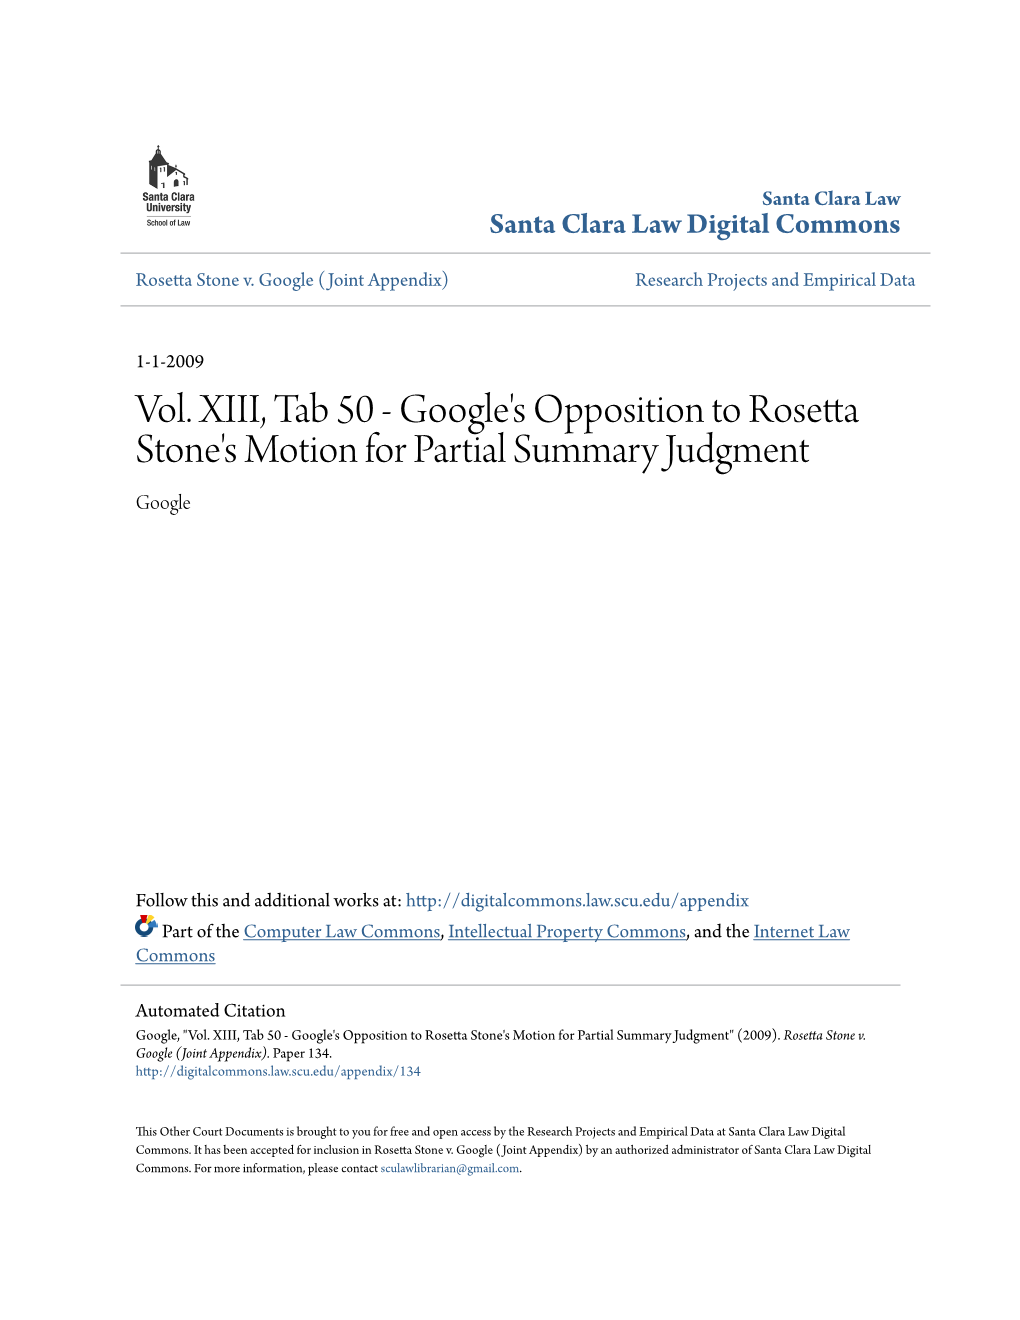 Google's Opposition to Rosetta Stone's Motion for Partial Summary Judgment Google